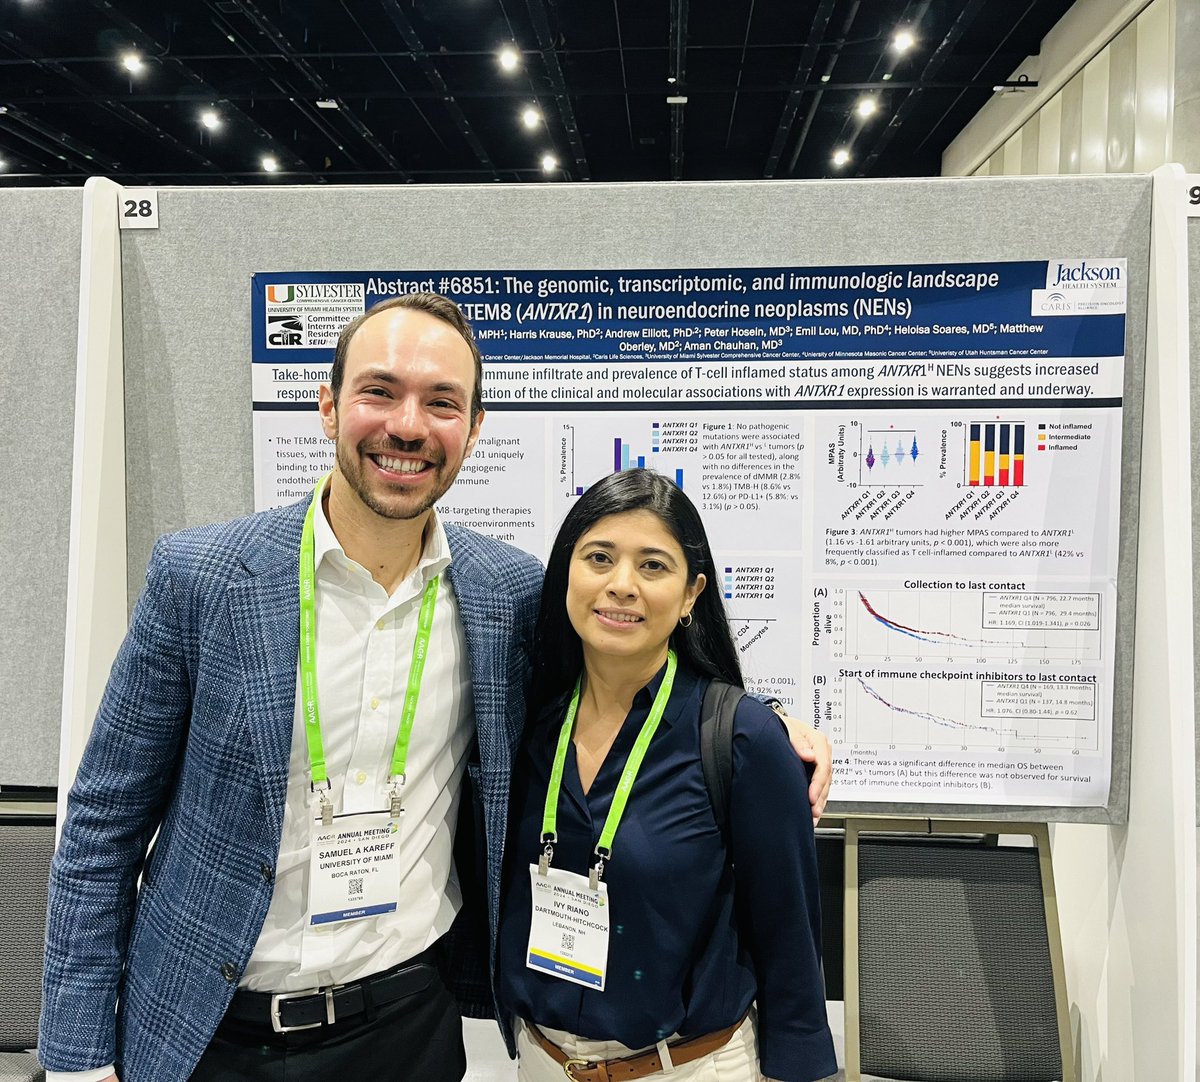 It was awesome to finally meet you in person @SamuelKareffMD I feel like I know you already ☺️ Many congrats on your work presented at #AACR24 @AACR #FutureThoracicOnc 😉 cc @GlopesMd @Latinamd 🙌🏼